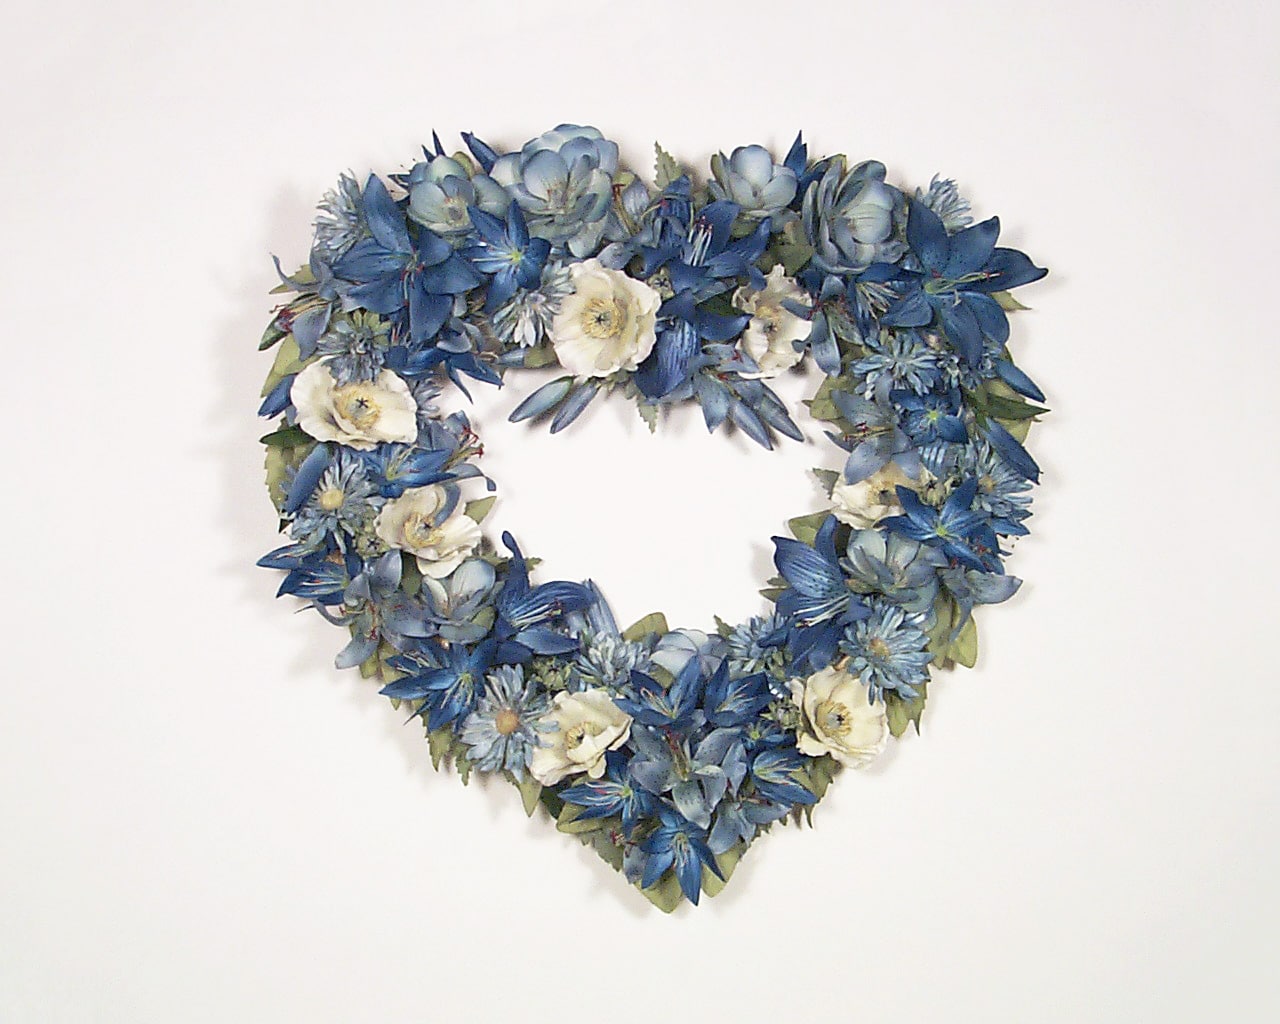 Wreath Ideas: Retired Speciality & Special Occassion Wreaths